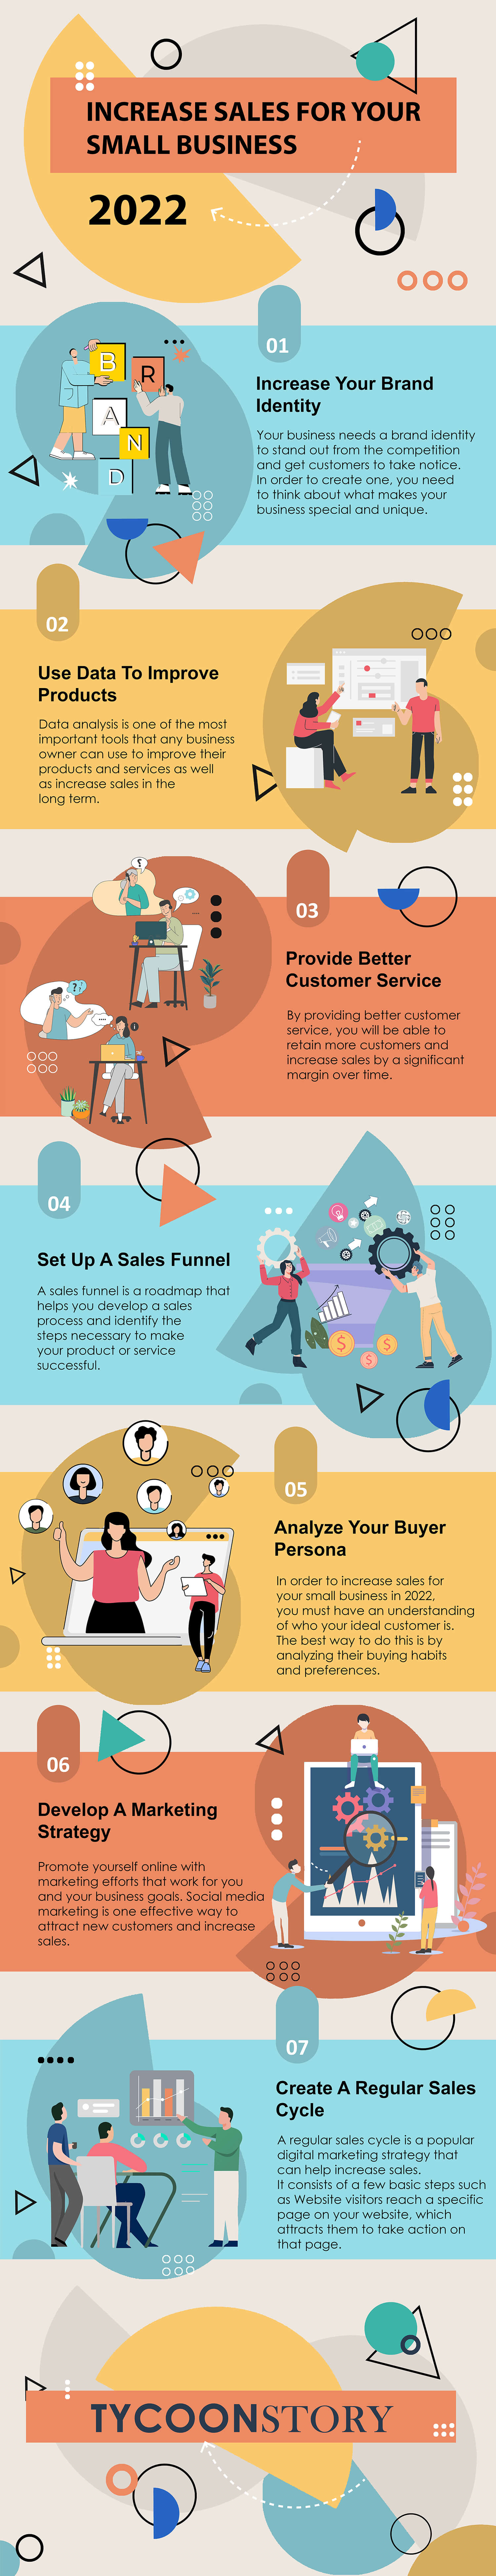 7 steps to increase sales for your small business in 2022 infographics